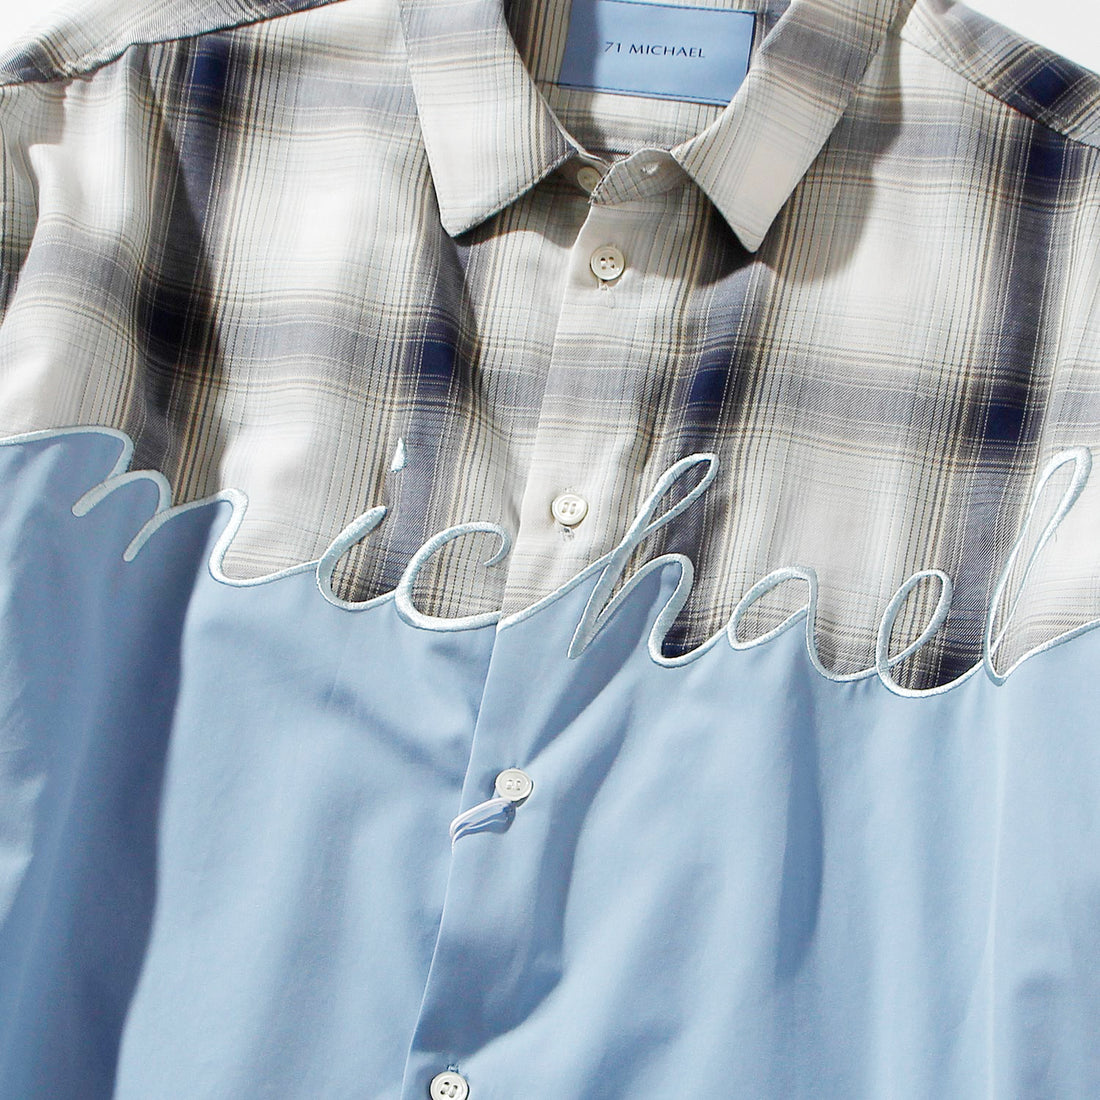 【71MICHAEL】EMBROIDERY SWITCHING SHIRT / SAX BLUE